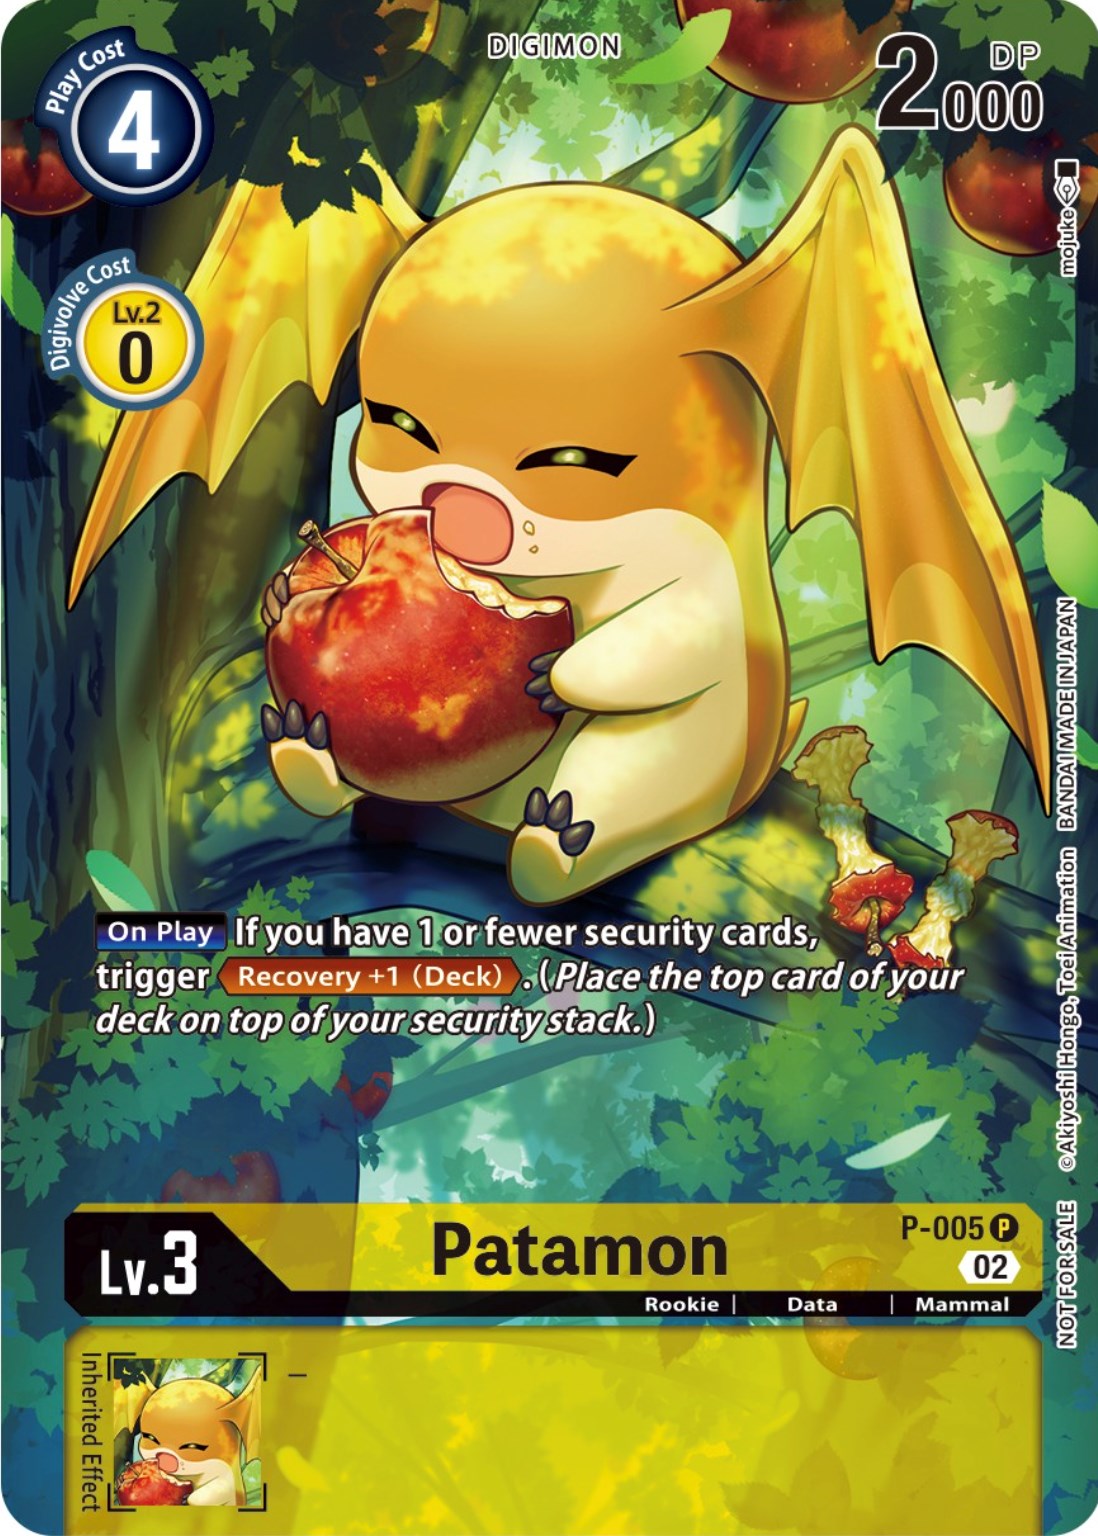 Patamon [P-005] (Digimon Illustration Competition Promotion Pack) [Promotional Cards] | The Time Vault CA